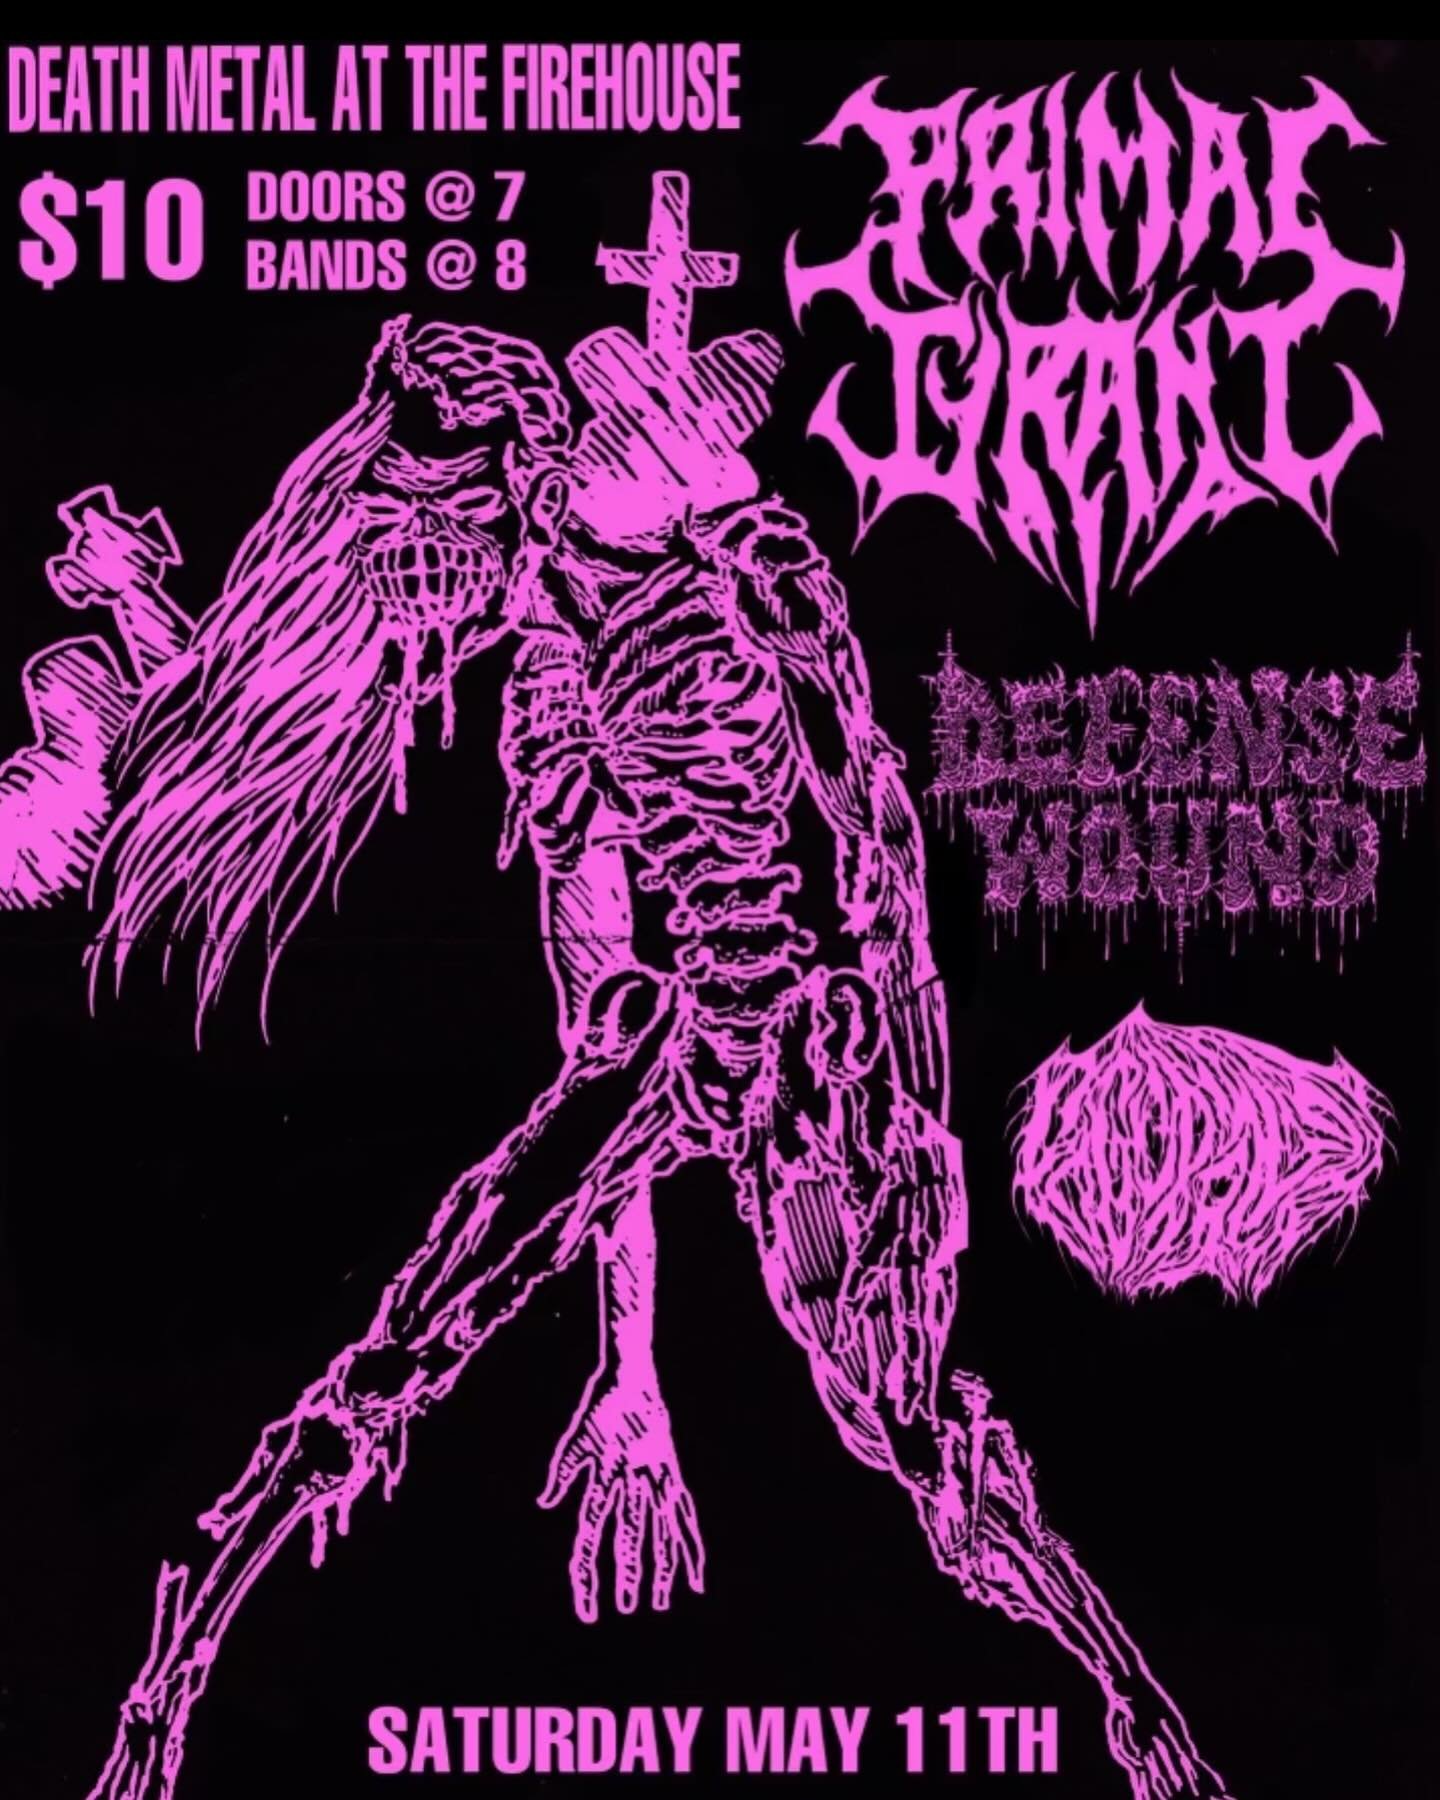 FRIDAY MAY 10th!!!! @primaltyranttx is bringing TEXAS DEATH METAL OBLITERATION VIBES TO THE FIREHOUSE!!!